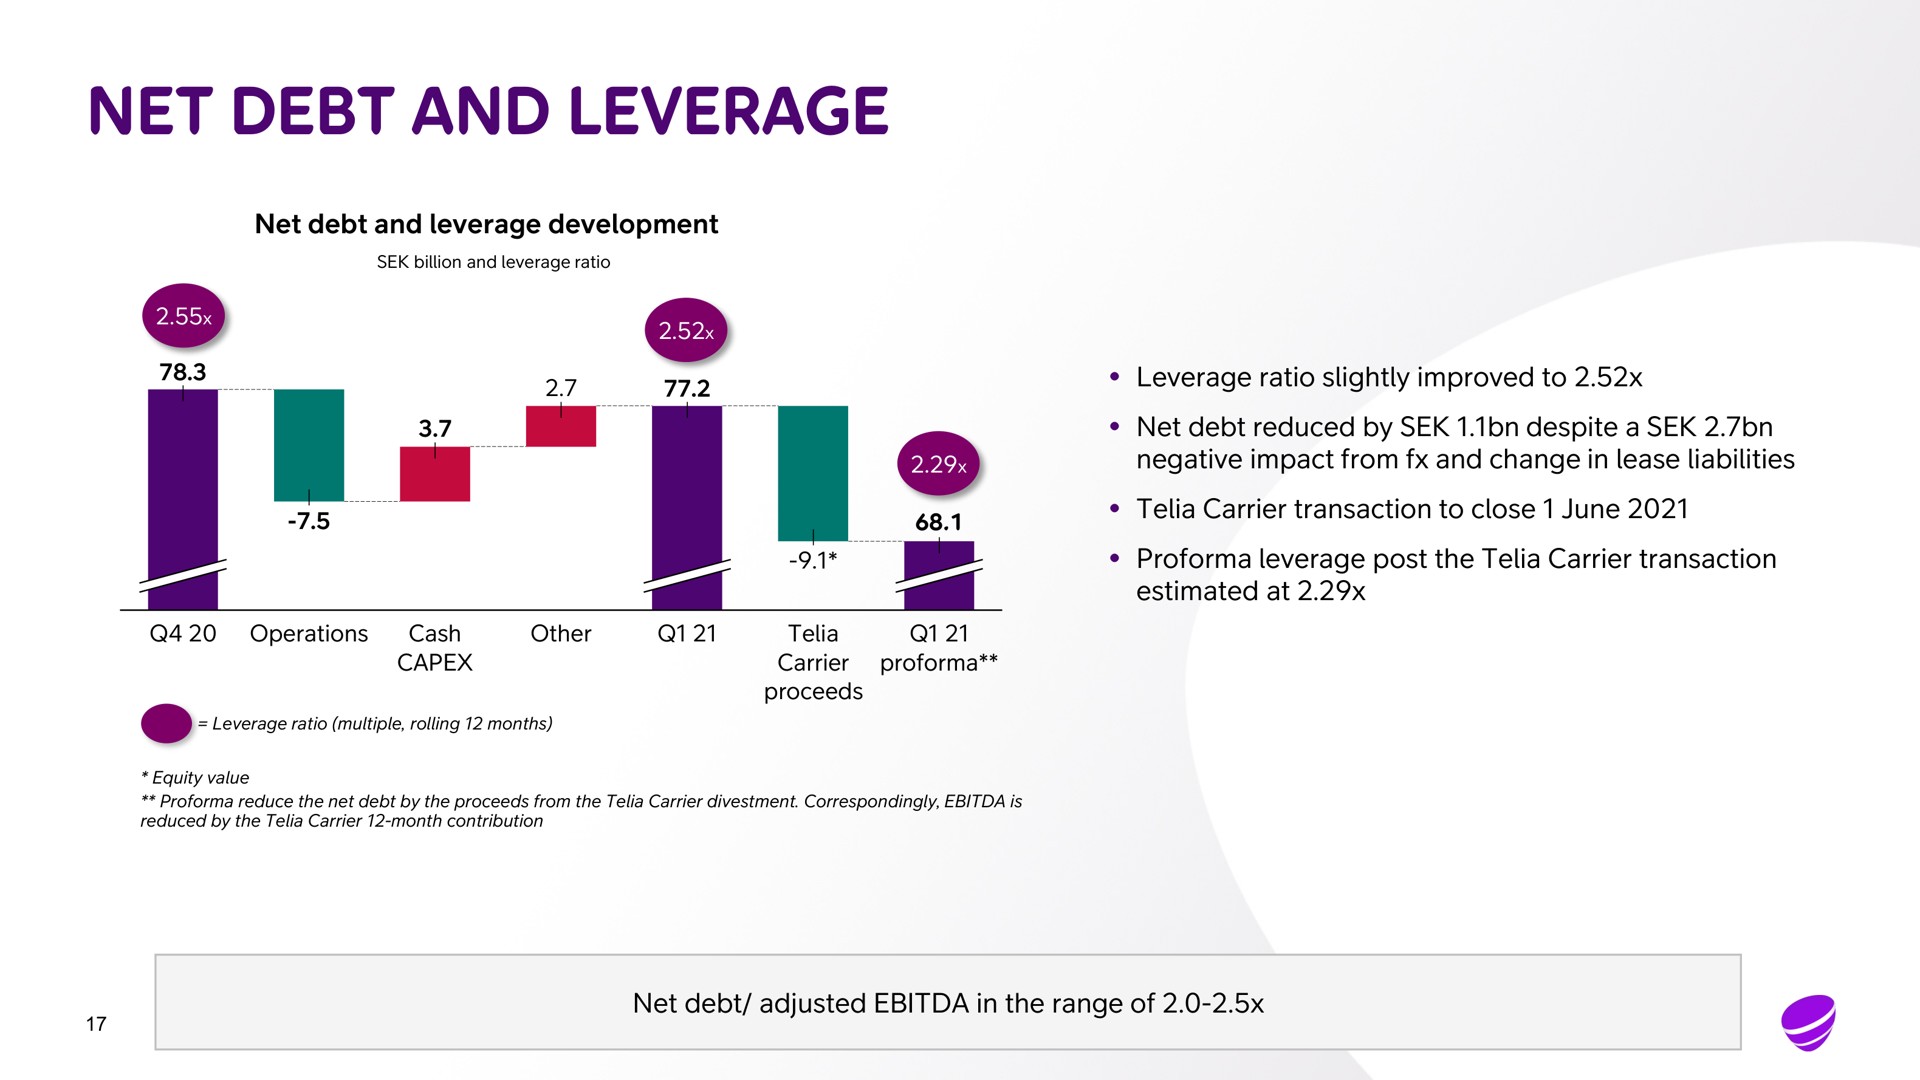 net debt and leverage net debt and leverage development leverage ratio slightly improved to net debt reduced by despite a negative impact from and change in lease liabilities carrier transaction to close june leverage post the carrier transaction estimated at net debt adjusted in the range of | Telia Company